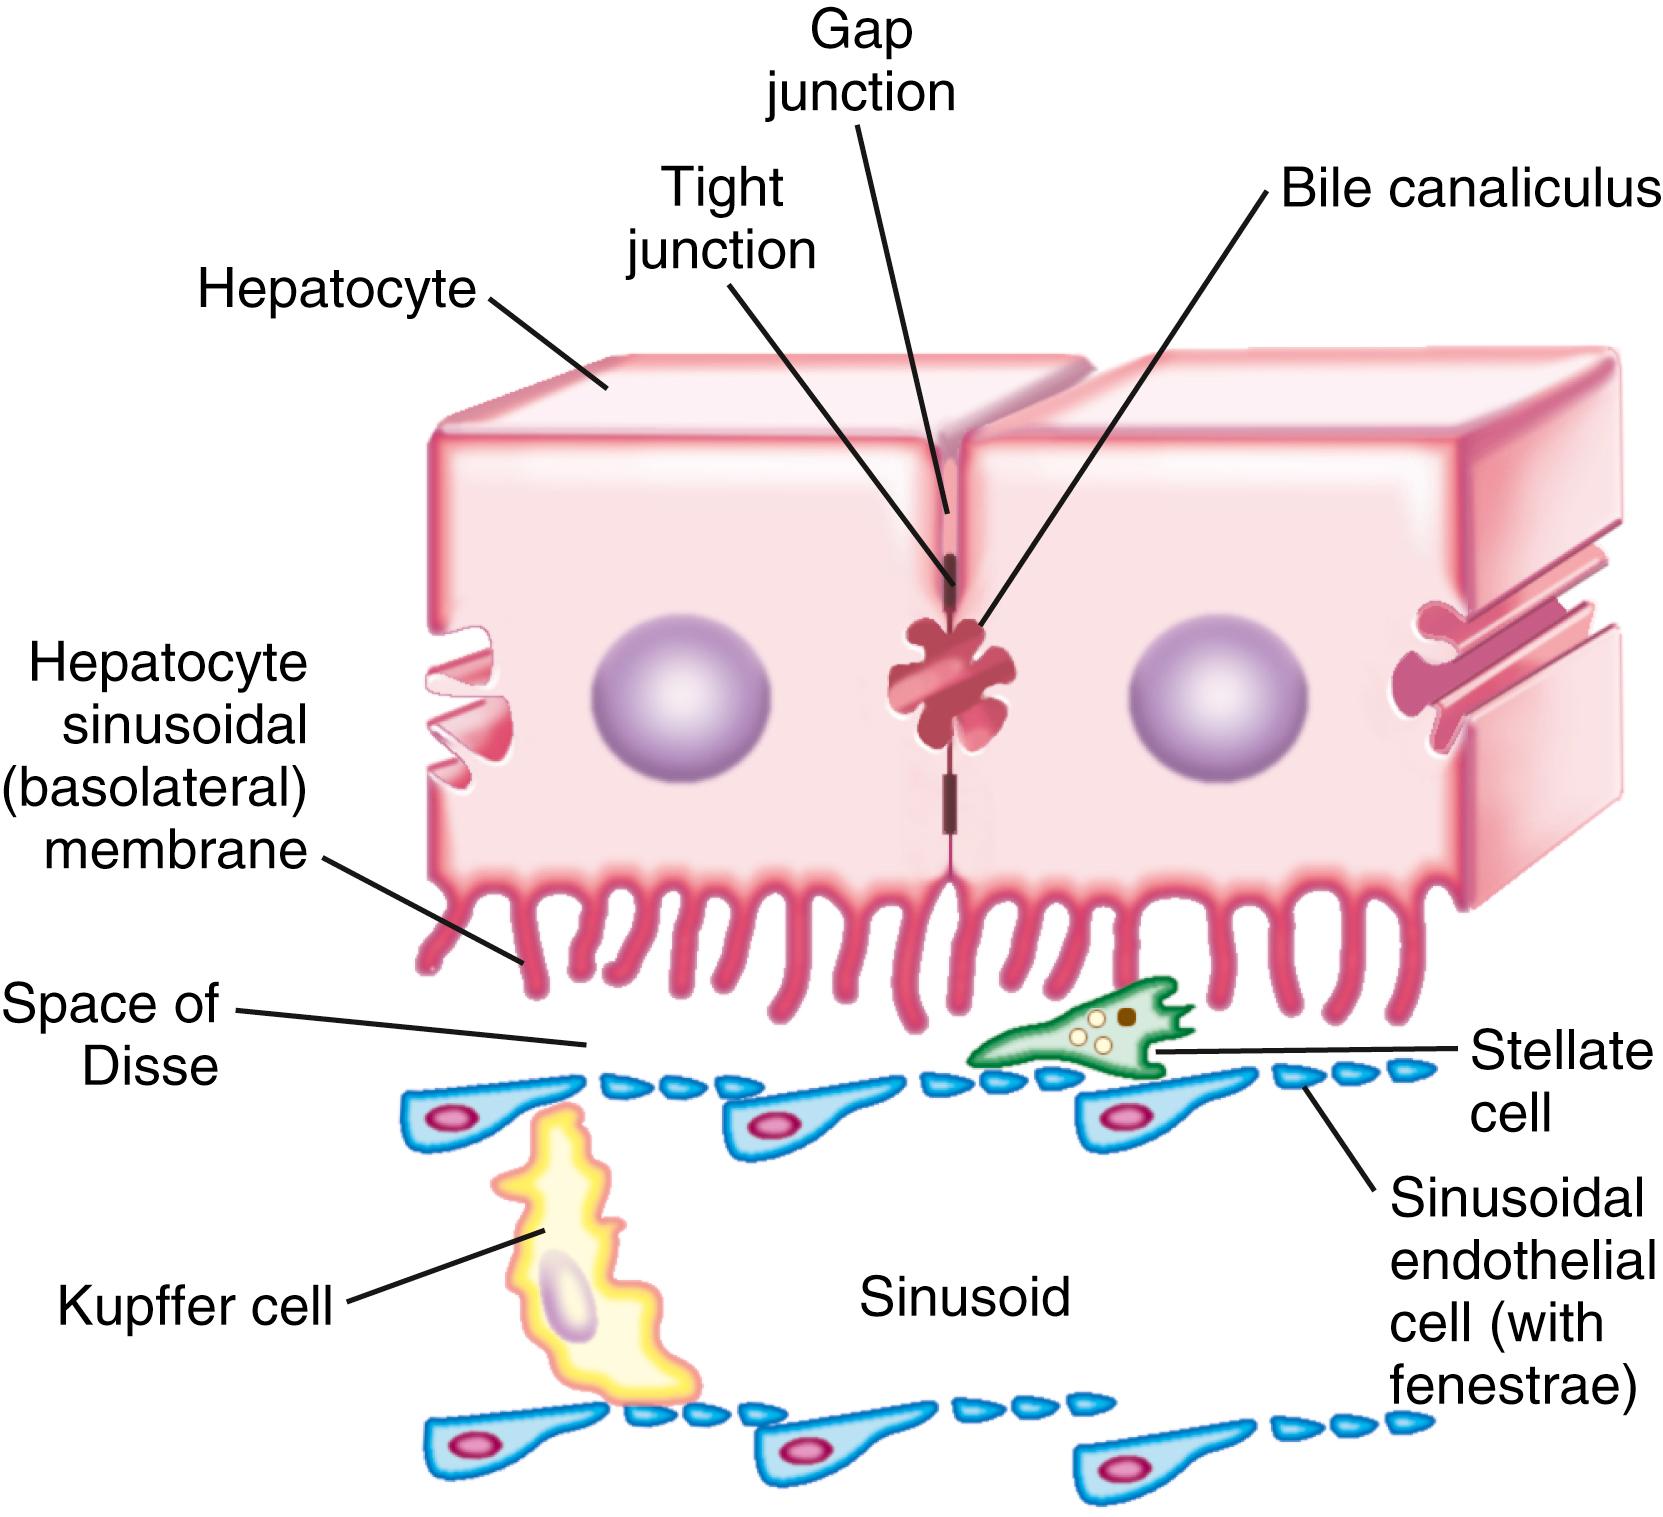 Fig. 72.1, The spatial relationship among the different cell types of the liver. Sinusoidal plasma comes in direct contact with hepatocytes in the space of Disse. The endothelial cells are fenestrated and lack a basement membrane. Kupffer cells are located in the lumen of the sinusoid, where they are in direct contact with the sinusoidal endothelial cells and portal blood. Stellate cells are situated between the endothelial cells and hepatocytes and come into direct contact with both cell types. The hepatocytes are joined with each other by tight junctions and the communicating gap junctions. The canalicular domain of the plasma membrane of 2 adjacent hepatocytes encloses the bile canaliculus.